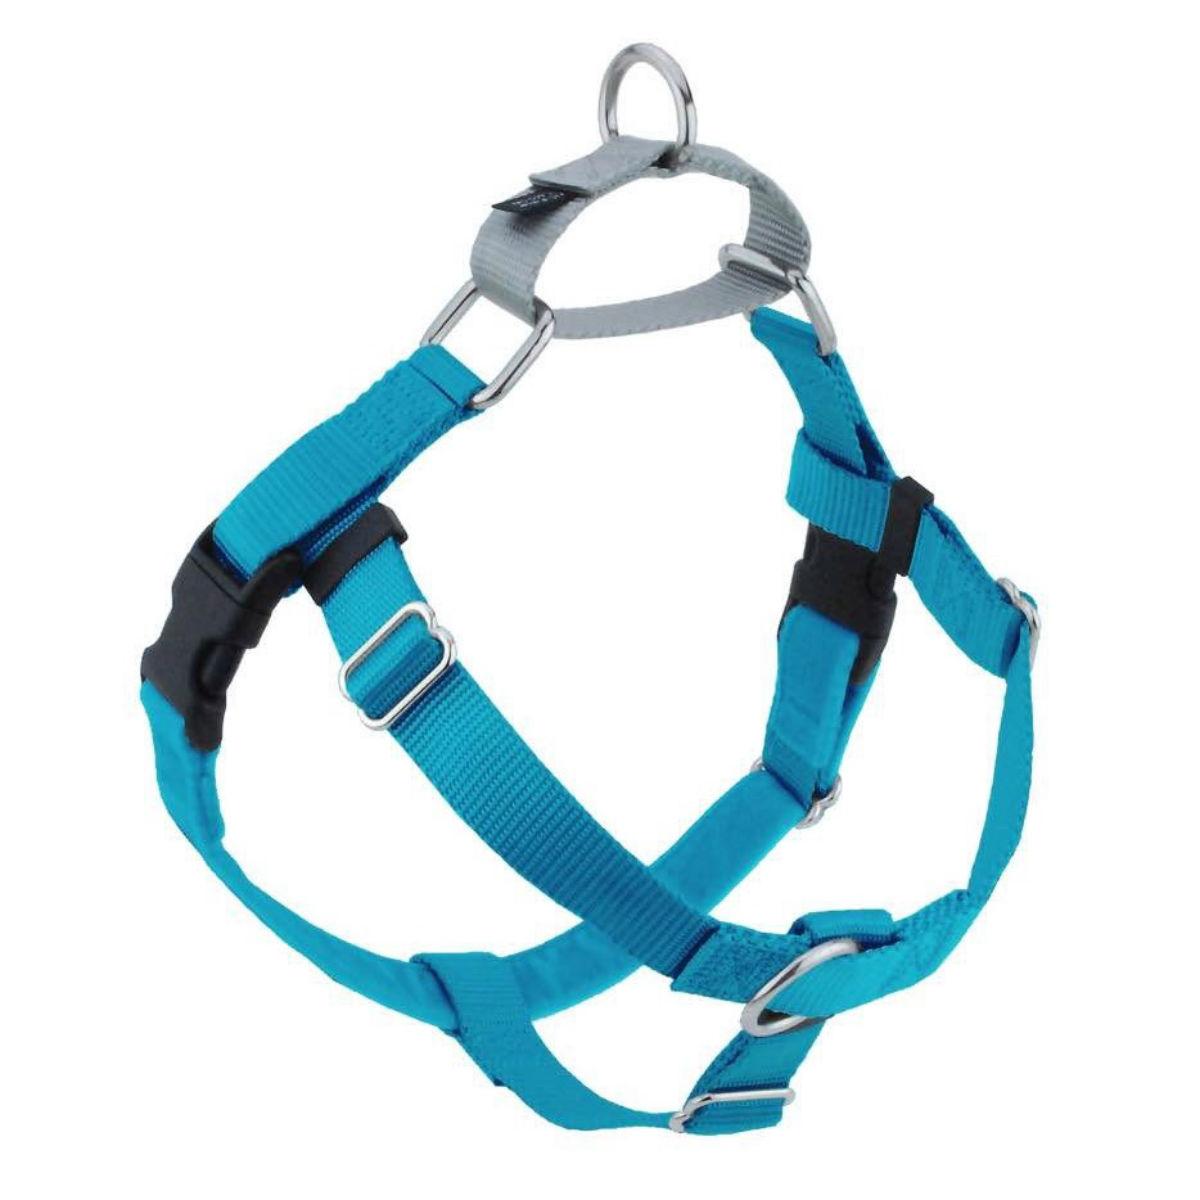 2 Hounds Design No-Pull Dog Harness Deluxe Training Package - Turquoise and Silver